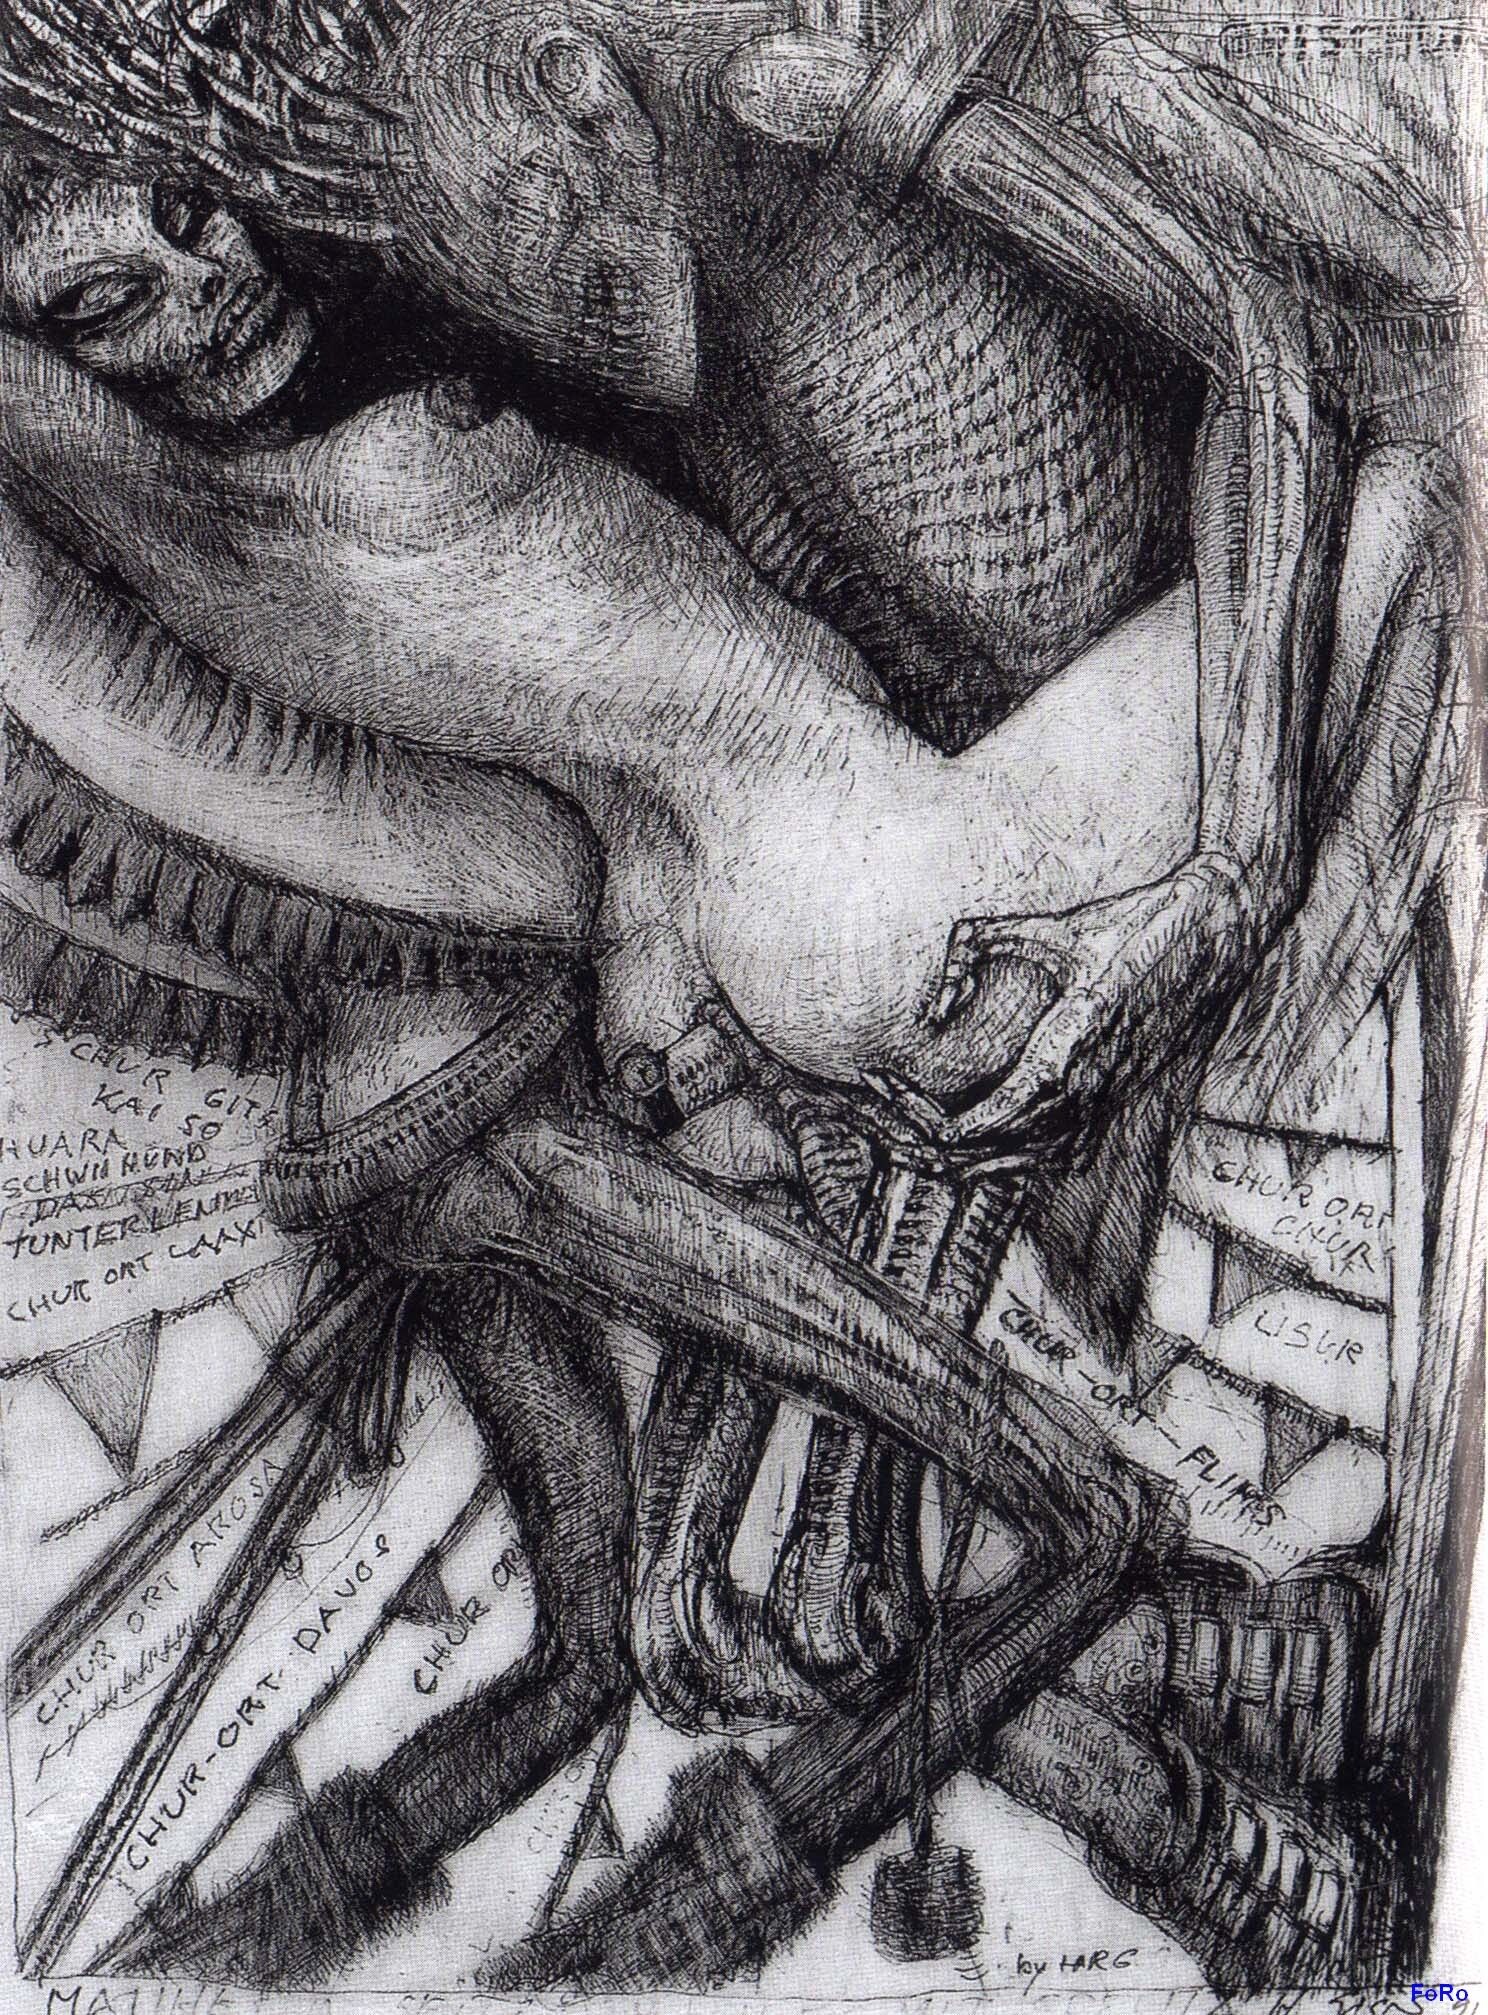 H.R. Giger: Conceptual Drawing, The Alien Infesting Process. 1490x2020 HD Wallpaper.